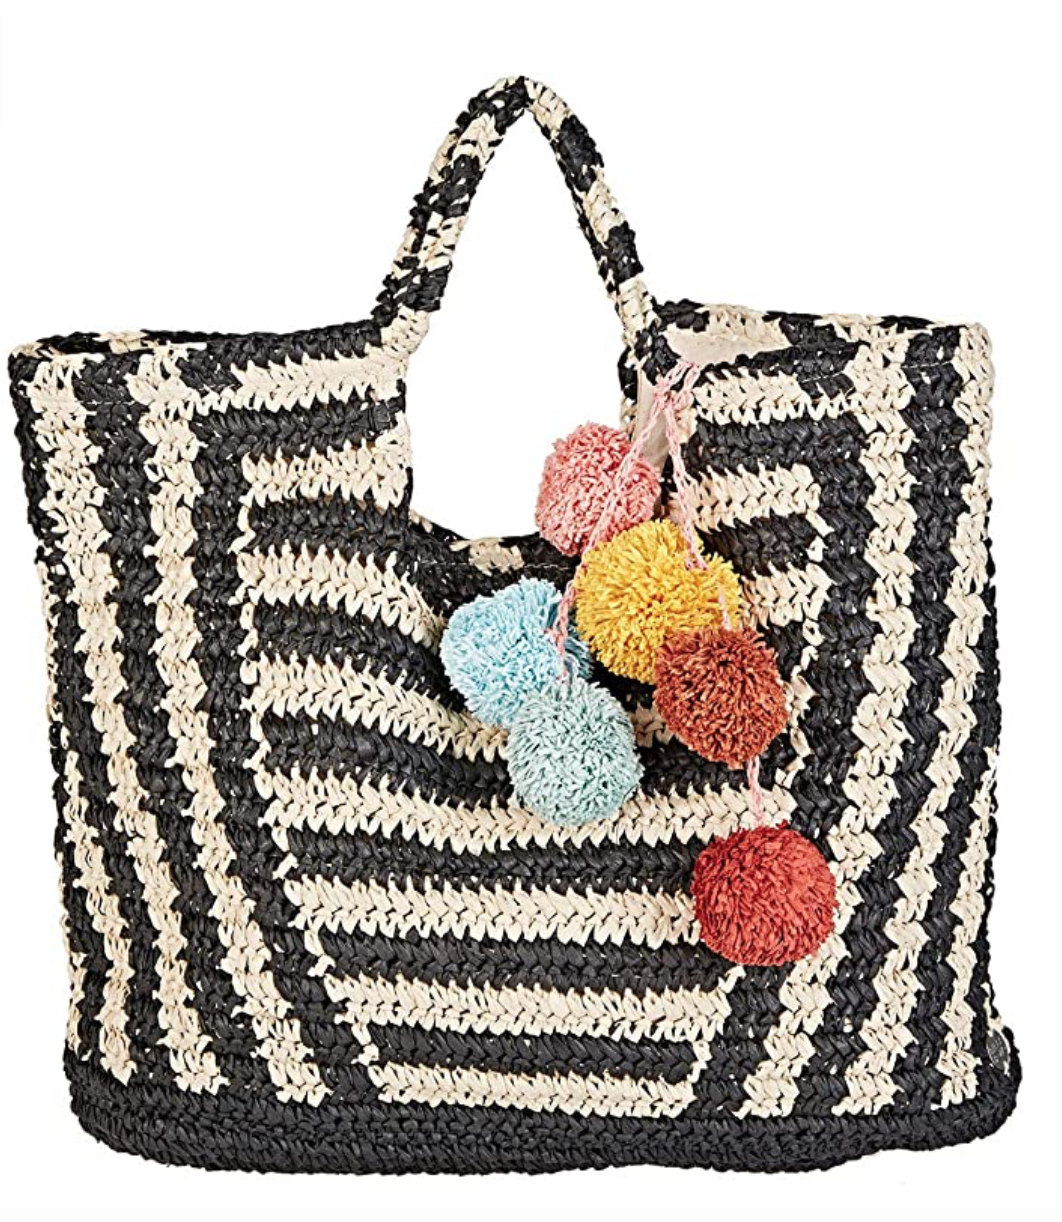 Summer straw tote